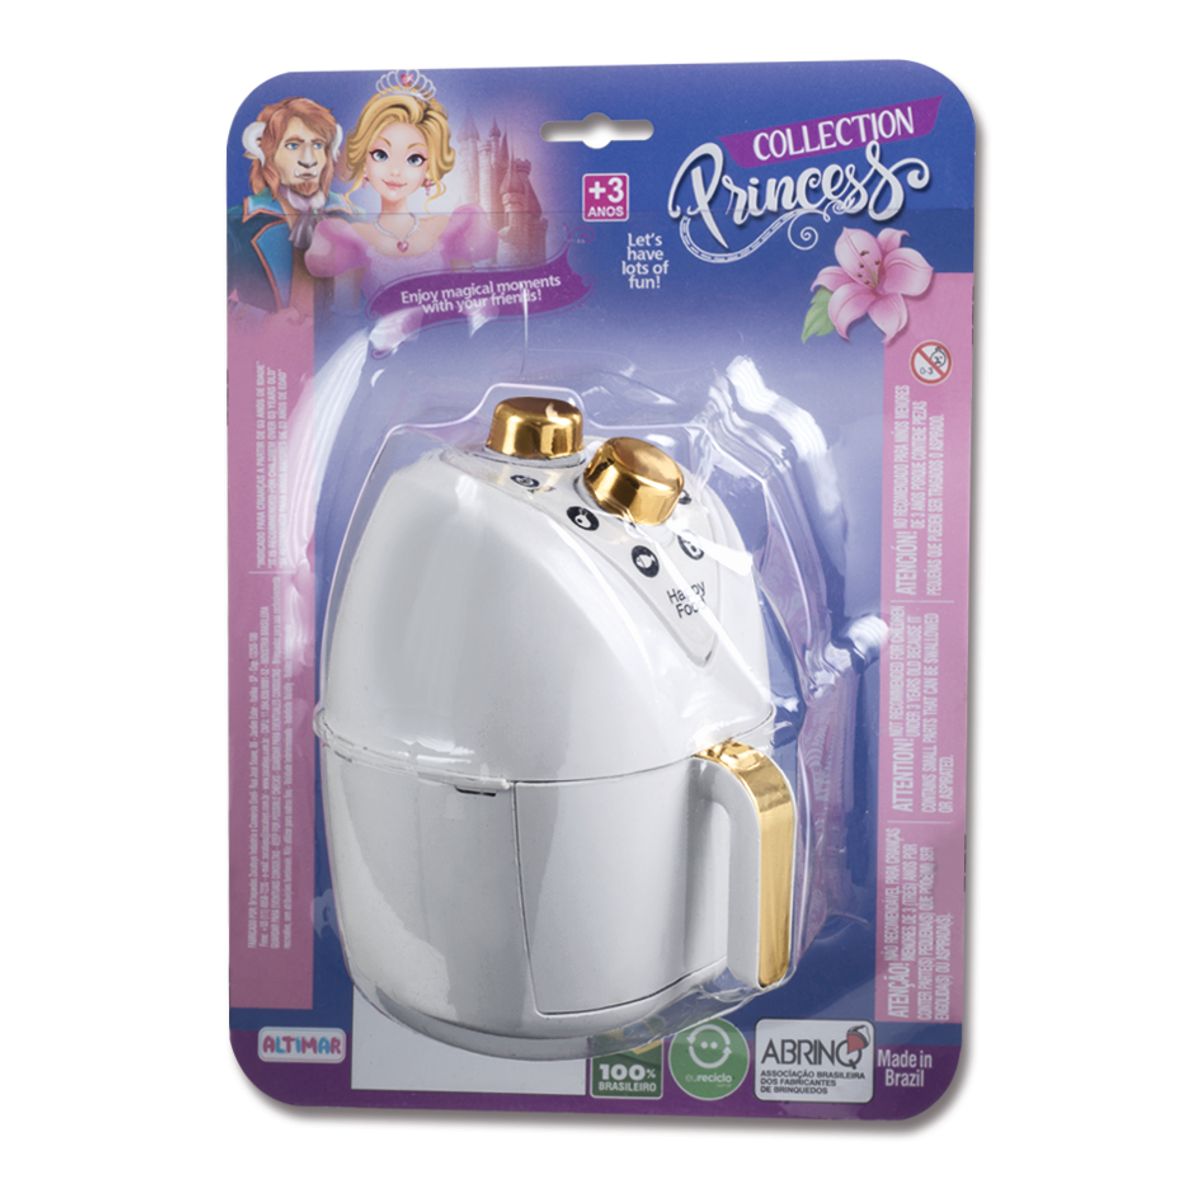 Air Fryer Zucatoys Colletion Princess image number 0